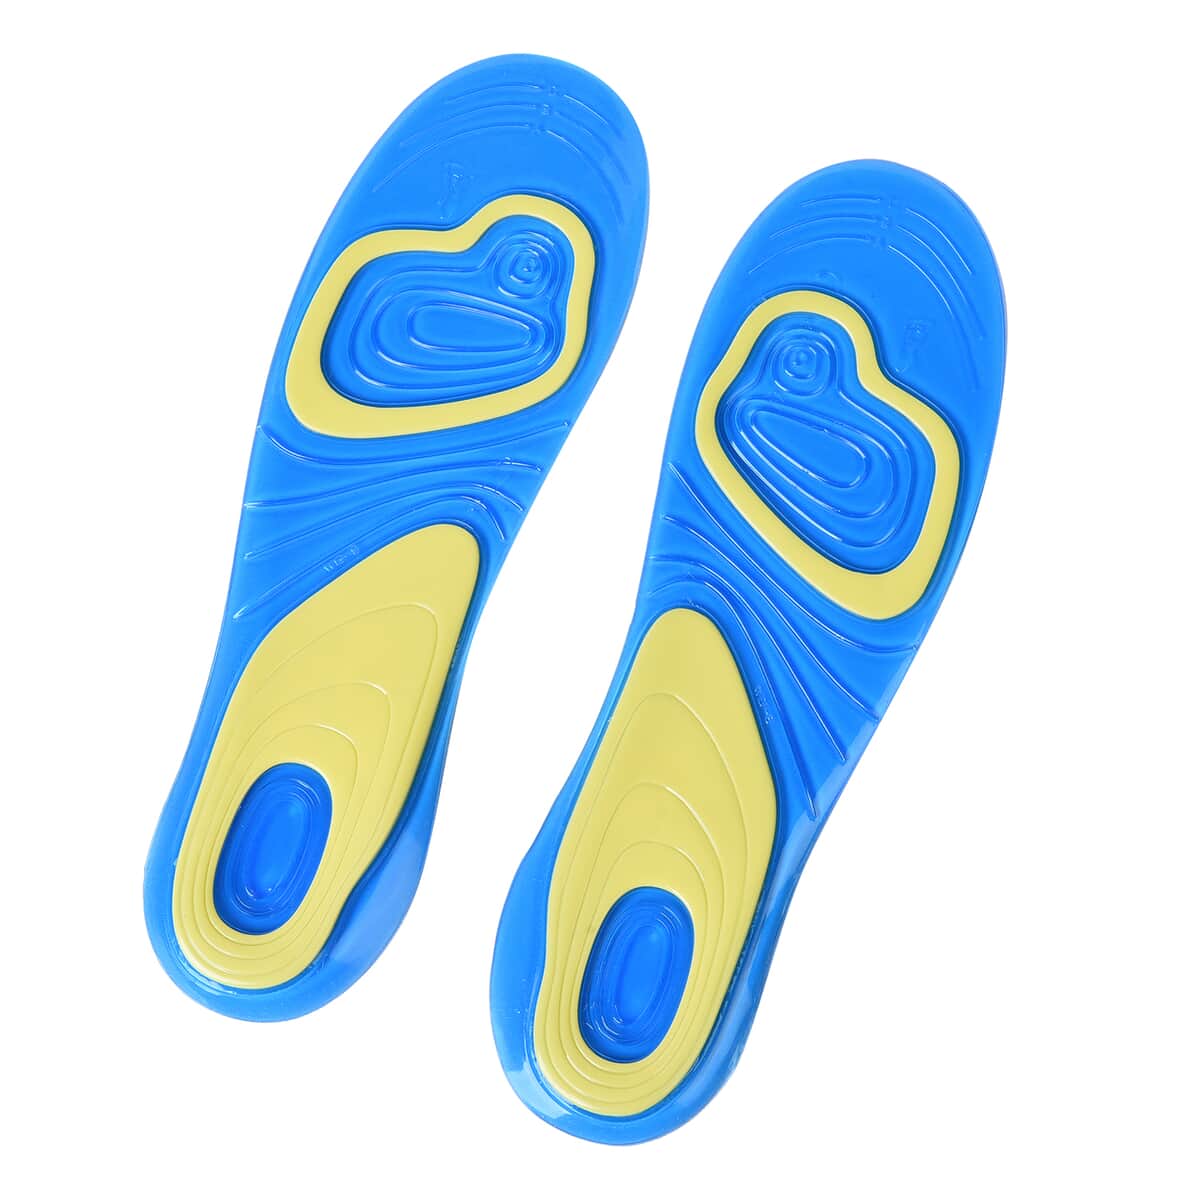 Anti Fatigue Athletic Running Work Shoe Gel Insoles for Women's - Blue & Yellow, Fits Womens Shoe Sizes 6 to 11 image number 0